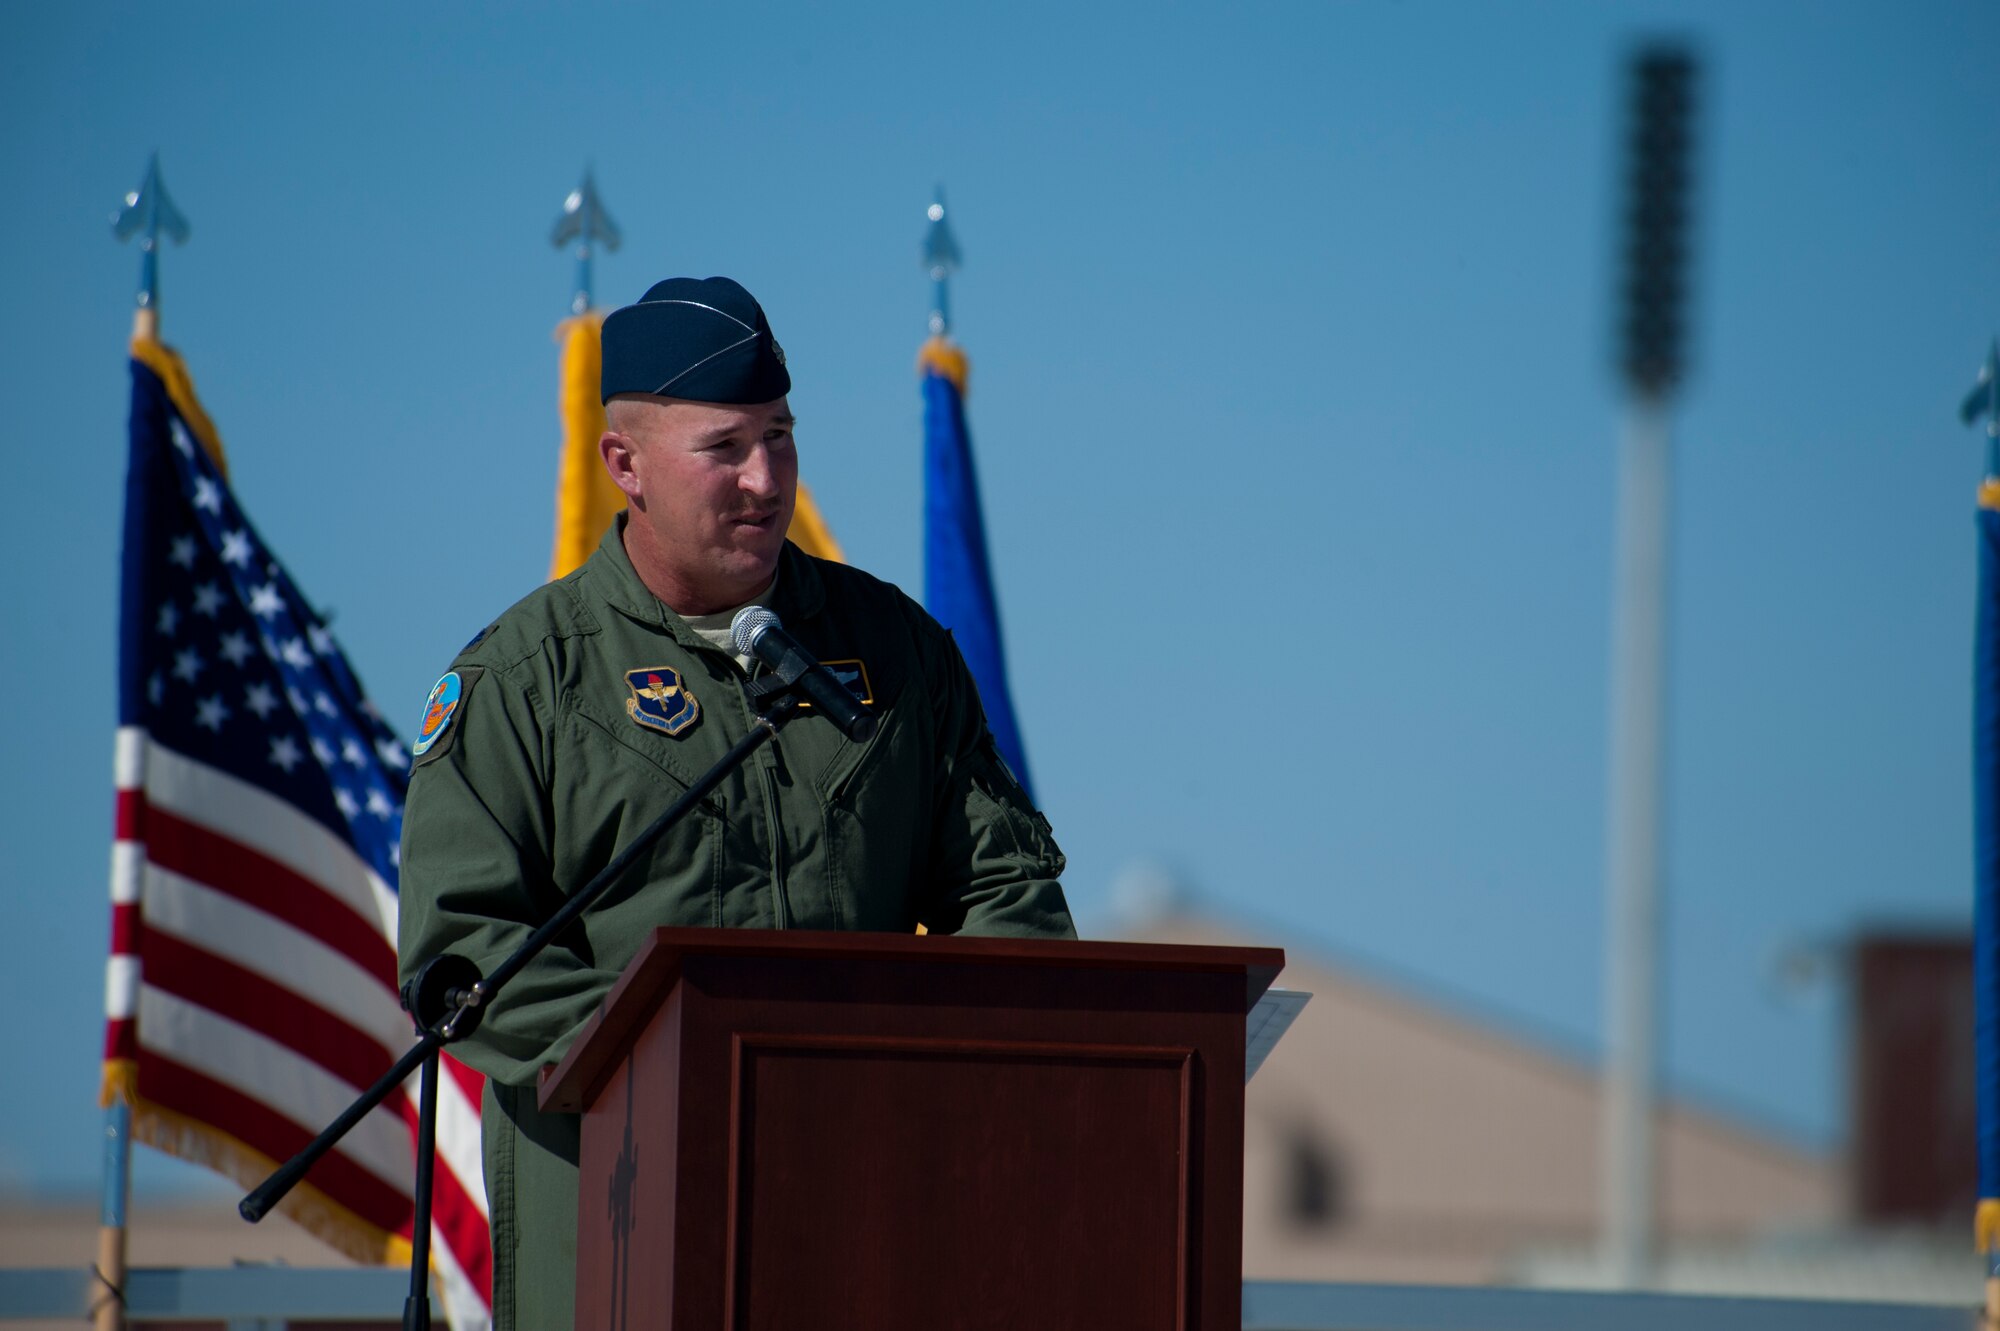 Lieutenant Col. Scott Fredrick, 311th Fighter Squadron commander, delivers a speech during the 54th Fighter Group activation at Holloman Air Force Base, N.M., March 11. The 54th Fighter Group, a tenant unit at Holloman, is a detachment the 56th Fighter Wing at Luke Air Force Base, Ariz., and will ultimately operate two F-16 Fighting Falcon aircraft training squadrons. The 54th Fighter Group plus three squadrons were activated at the ceremony: the 311th Fighter Squadron, the 54th Operations Support Squadron and the 54th Aircraft Maintenance Squadron. (U.S. Air Force photo by Airman 1st Class Aaron Montoya / Released)